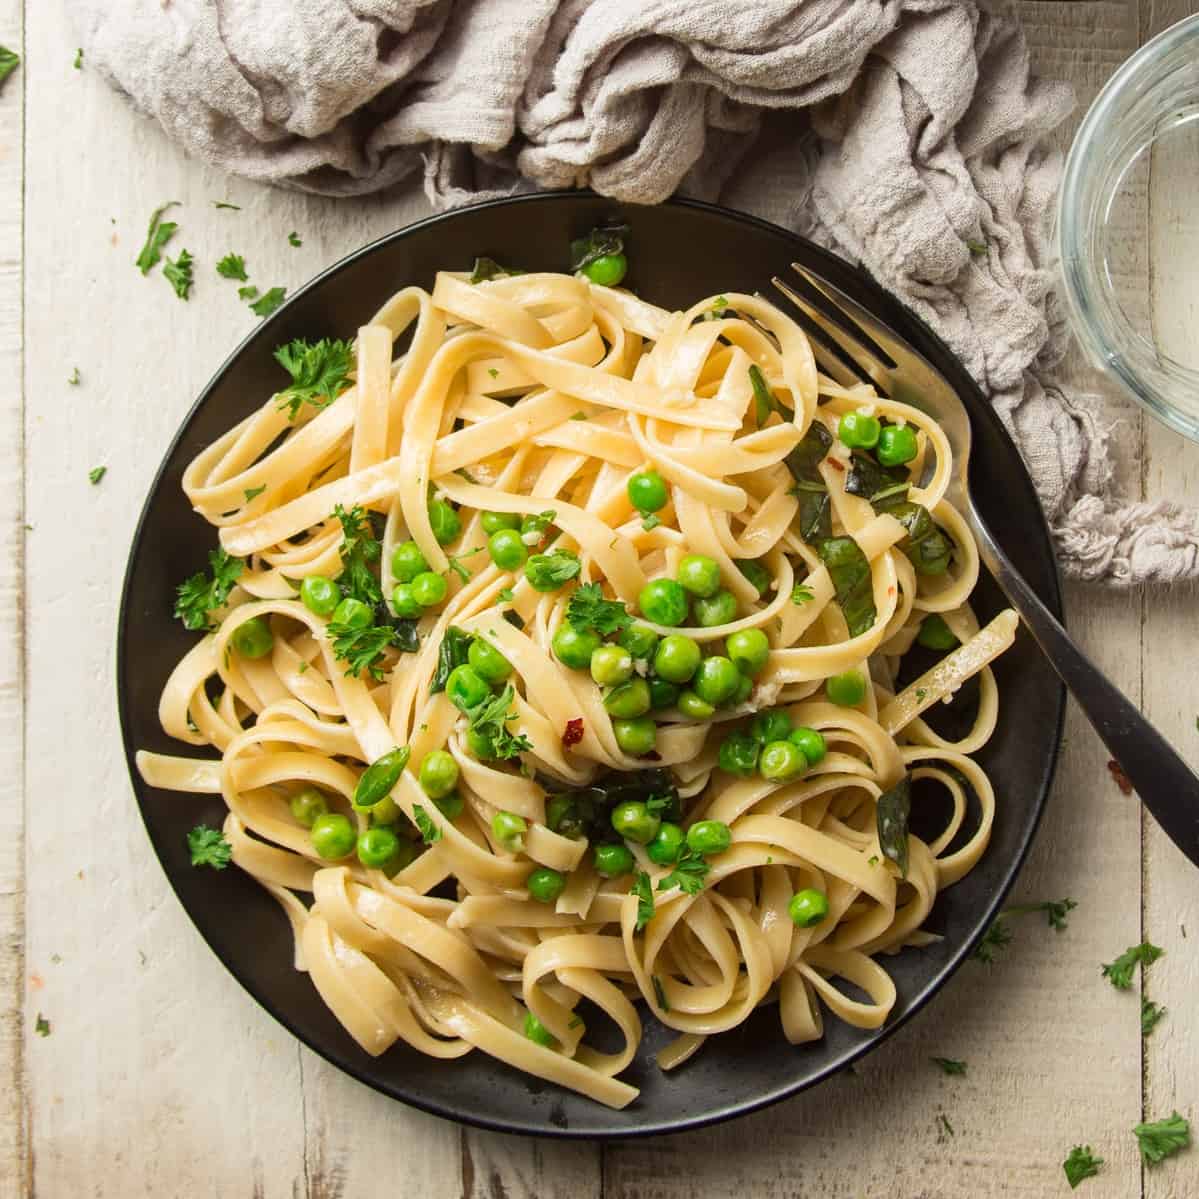 Plate of White Wine Pasta and Peas